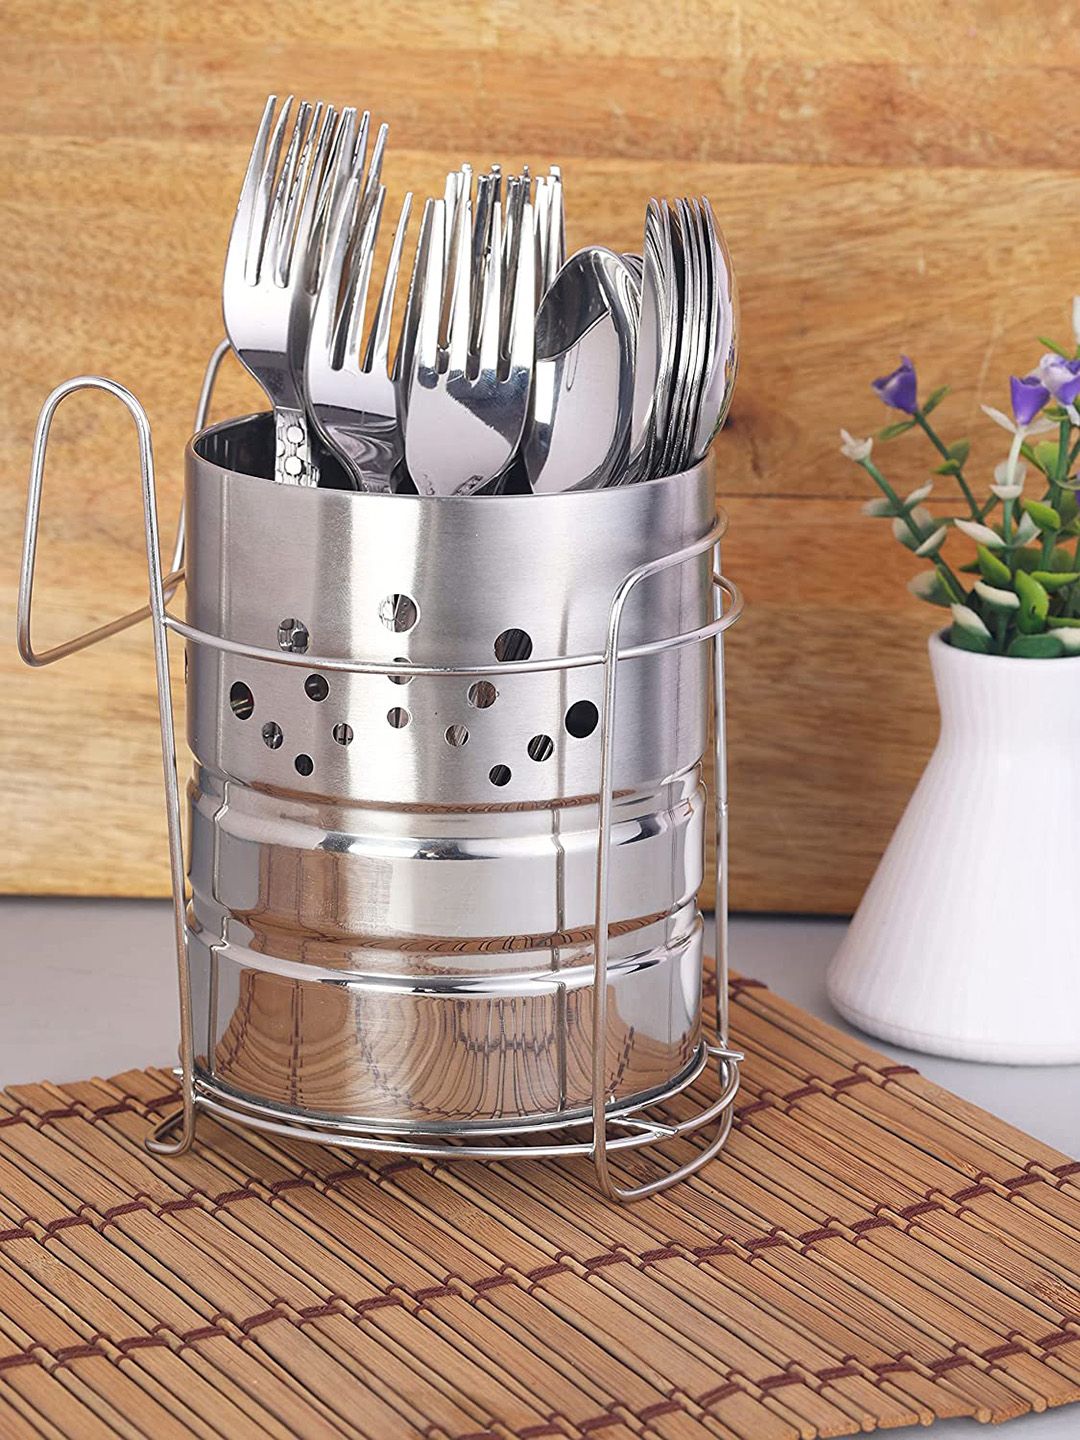 ZEVORA Set Of 12 Silver-Toned Solid Stainless Steel Forks & Spoons Cutlery Holder Price in India